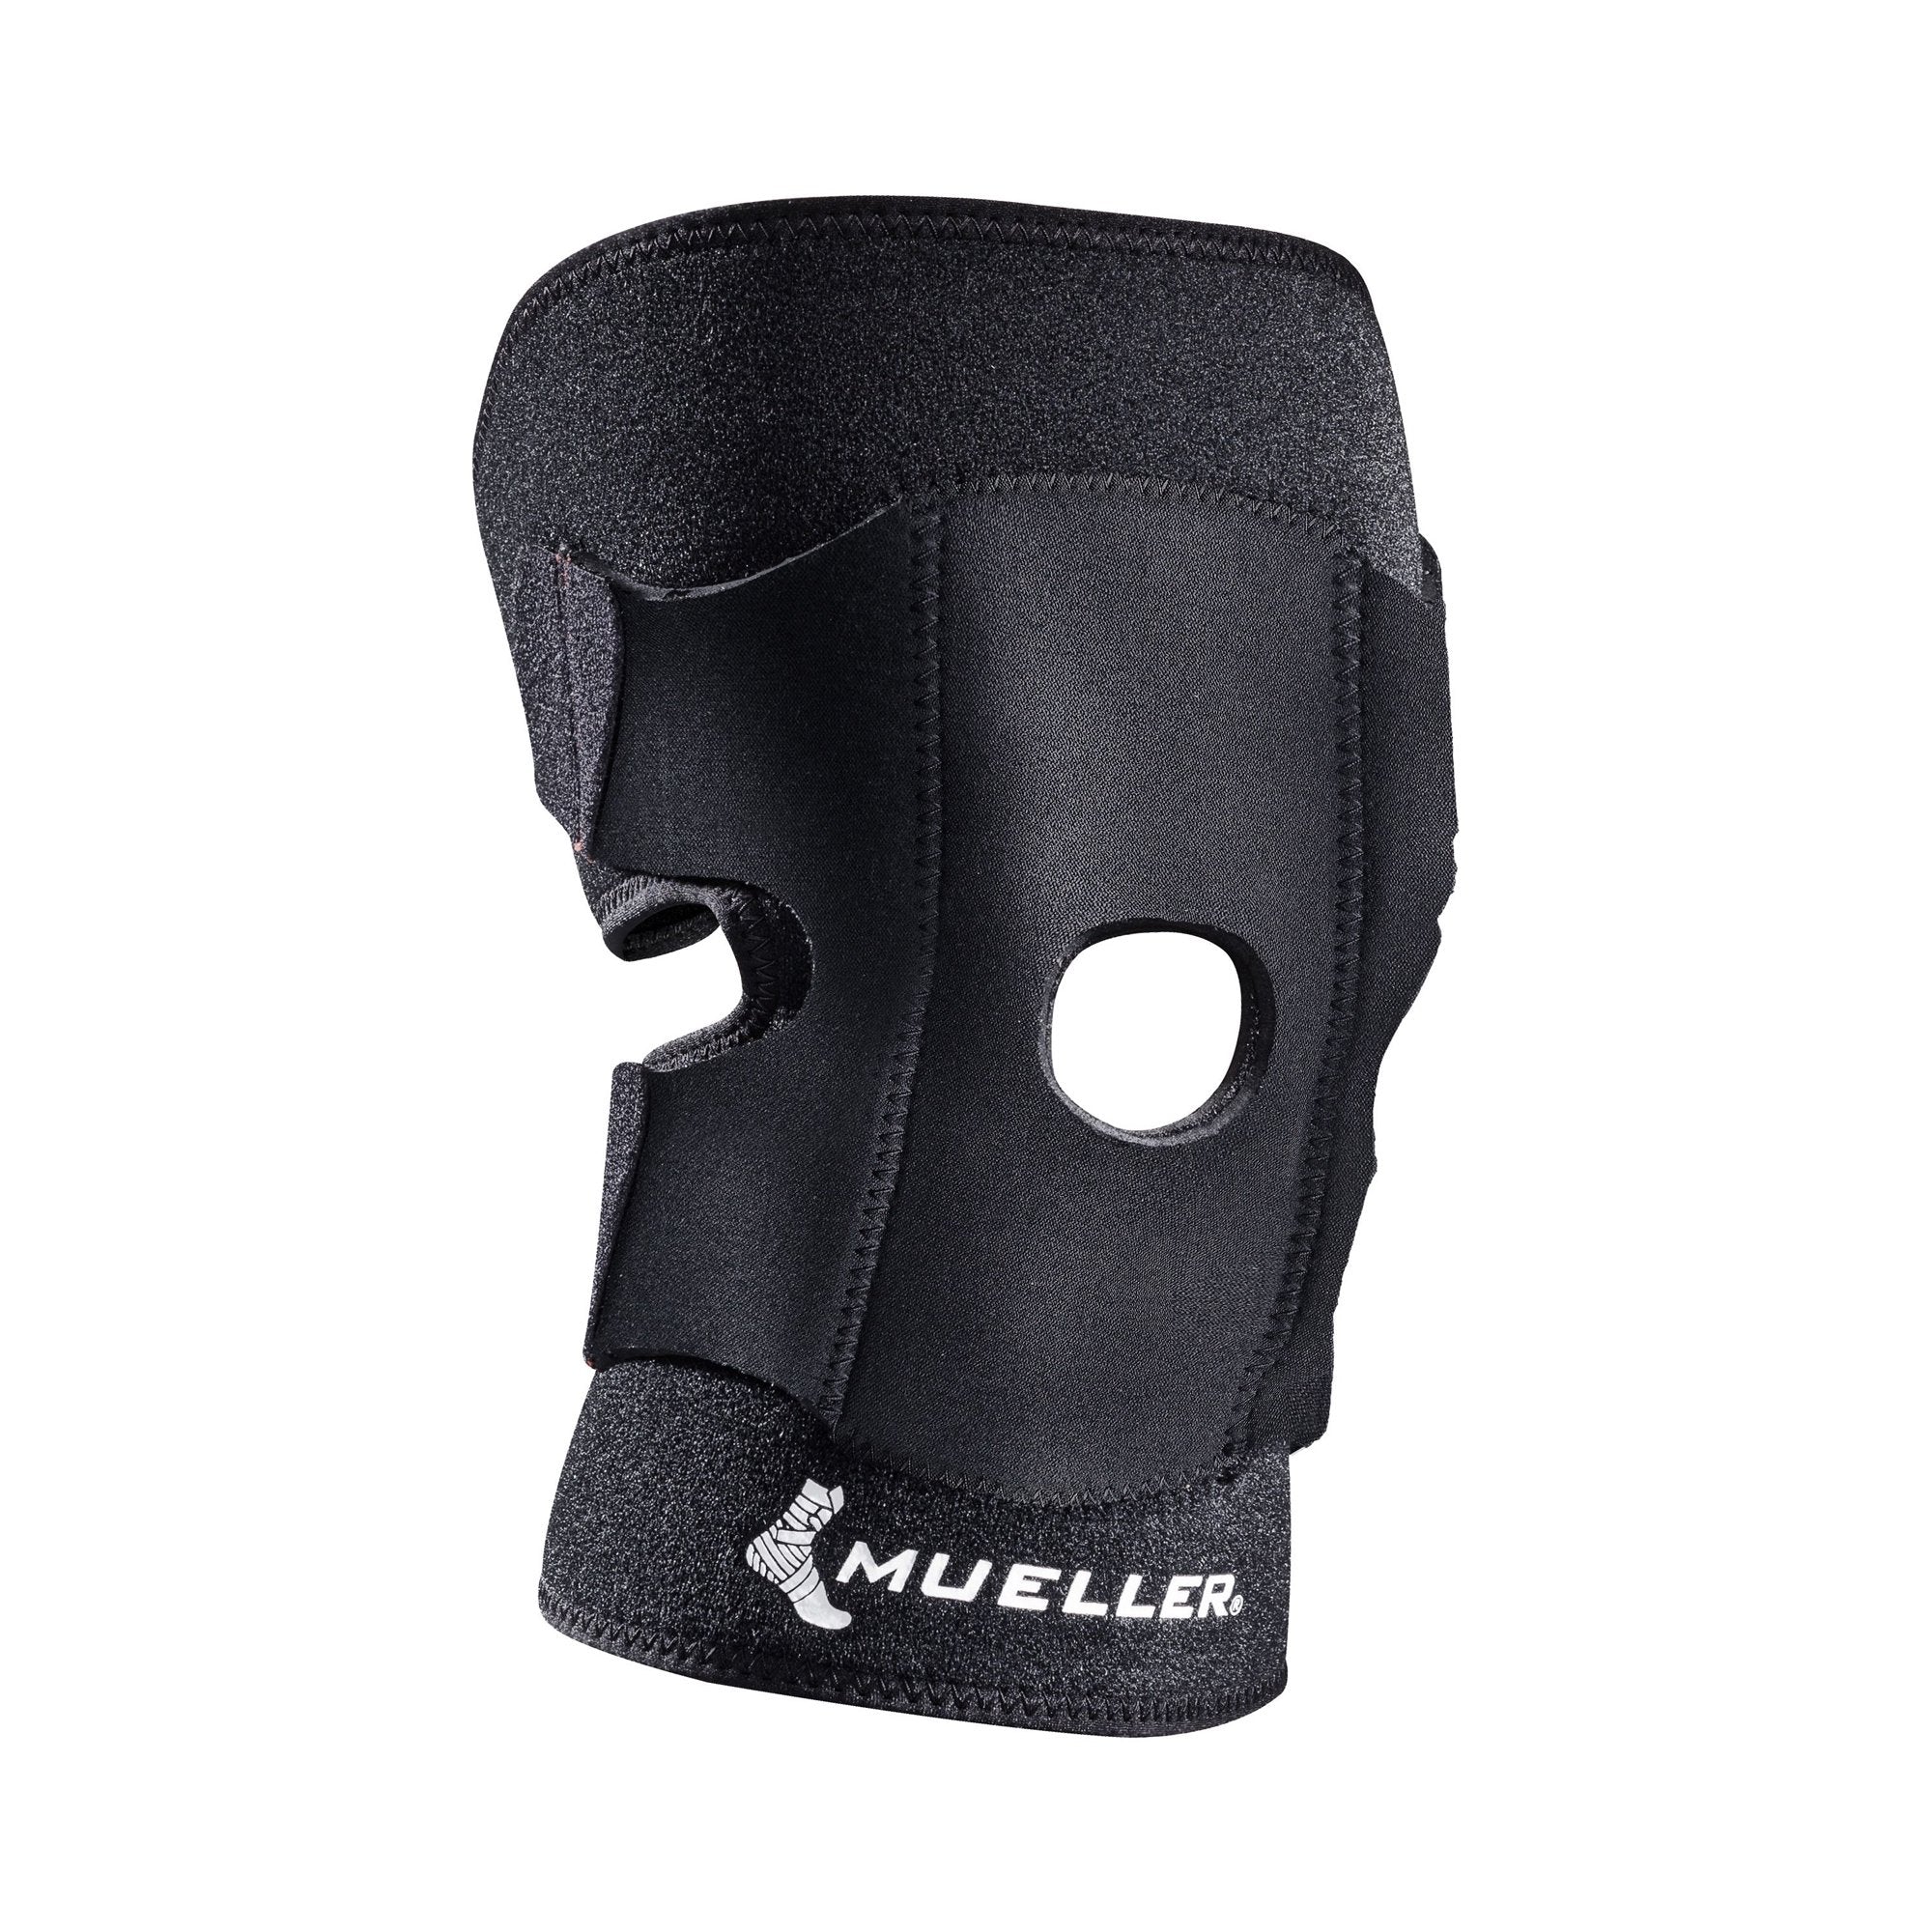 Knee Support One Size Fits Most Pull-On / Hook and Loop Strap Closure 12 to 20 Inch Left or Right Knee